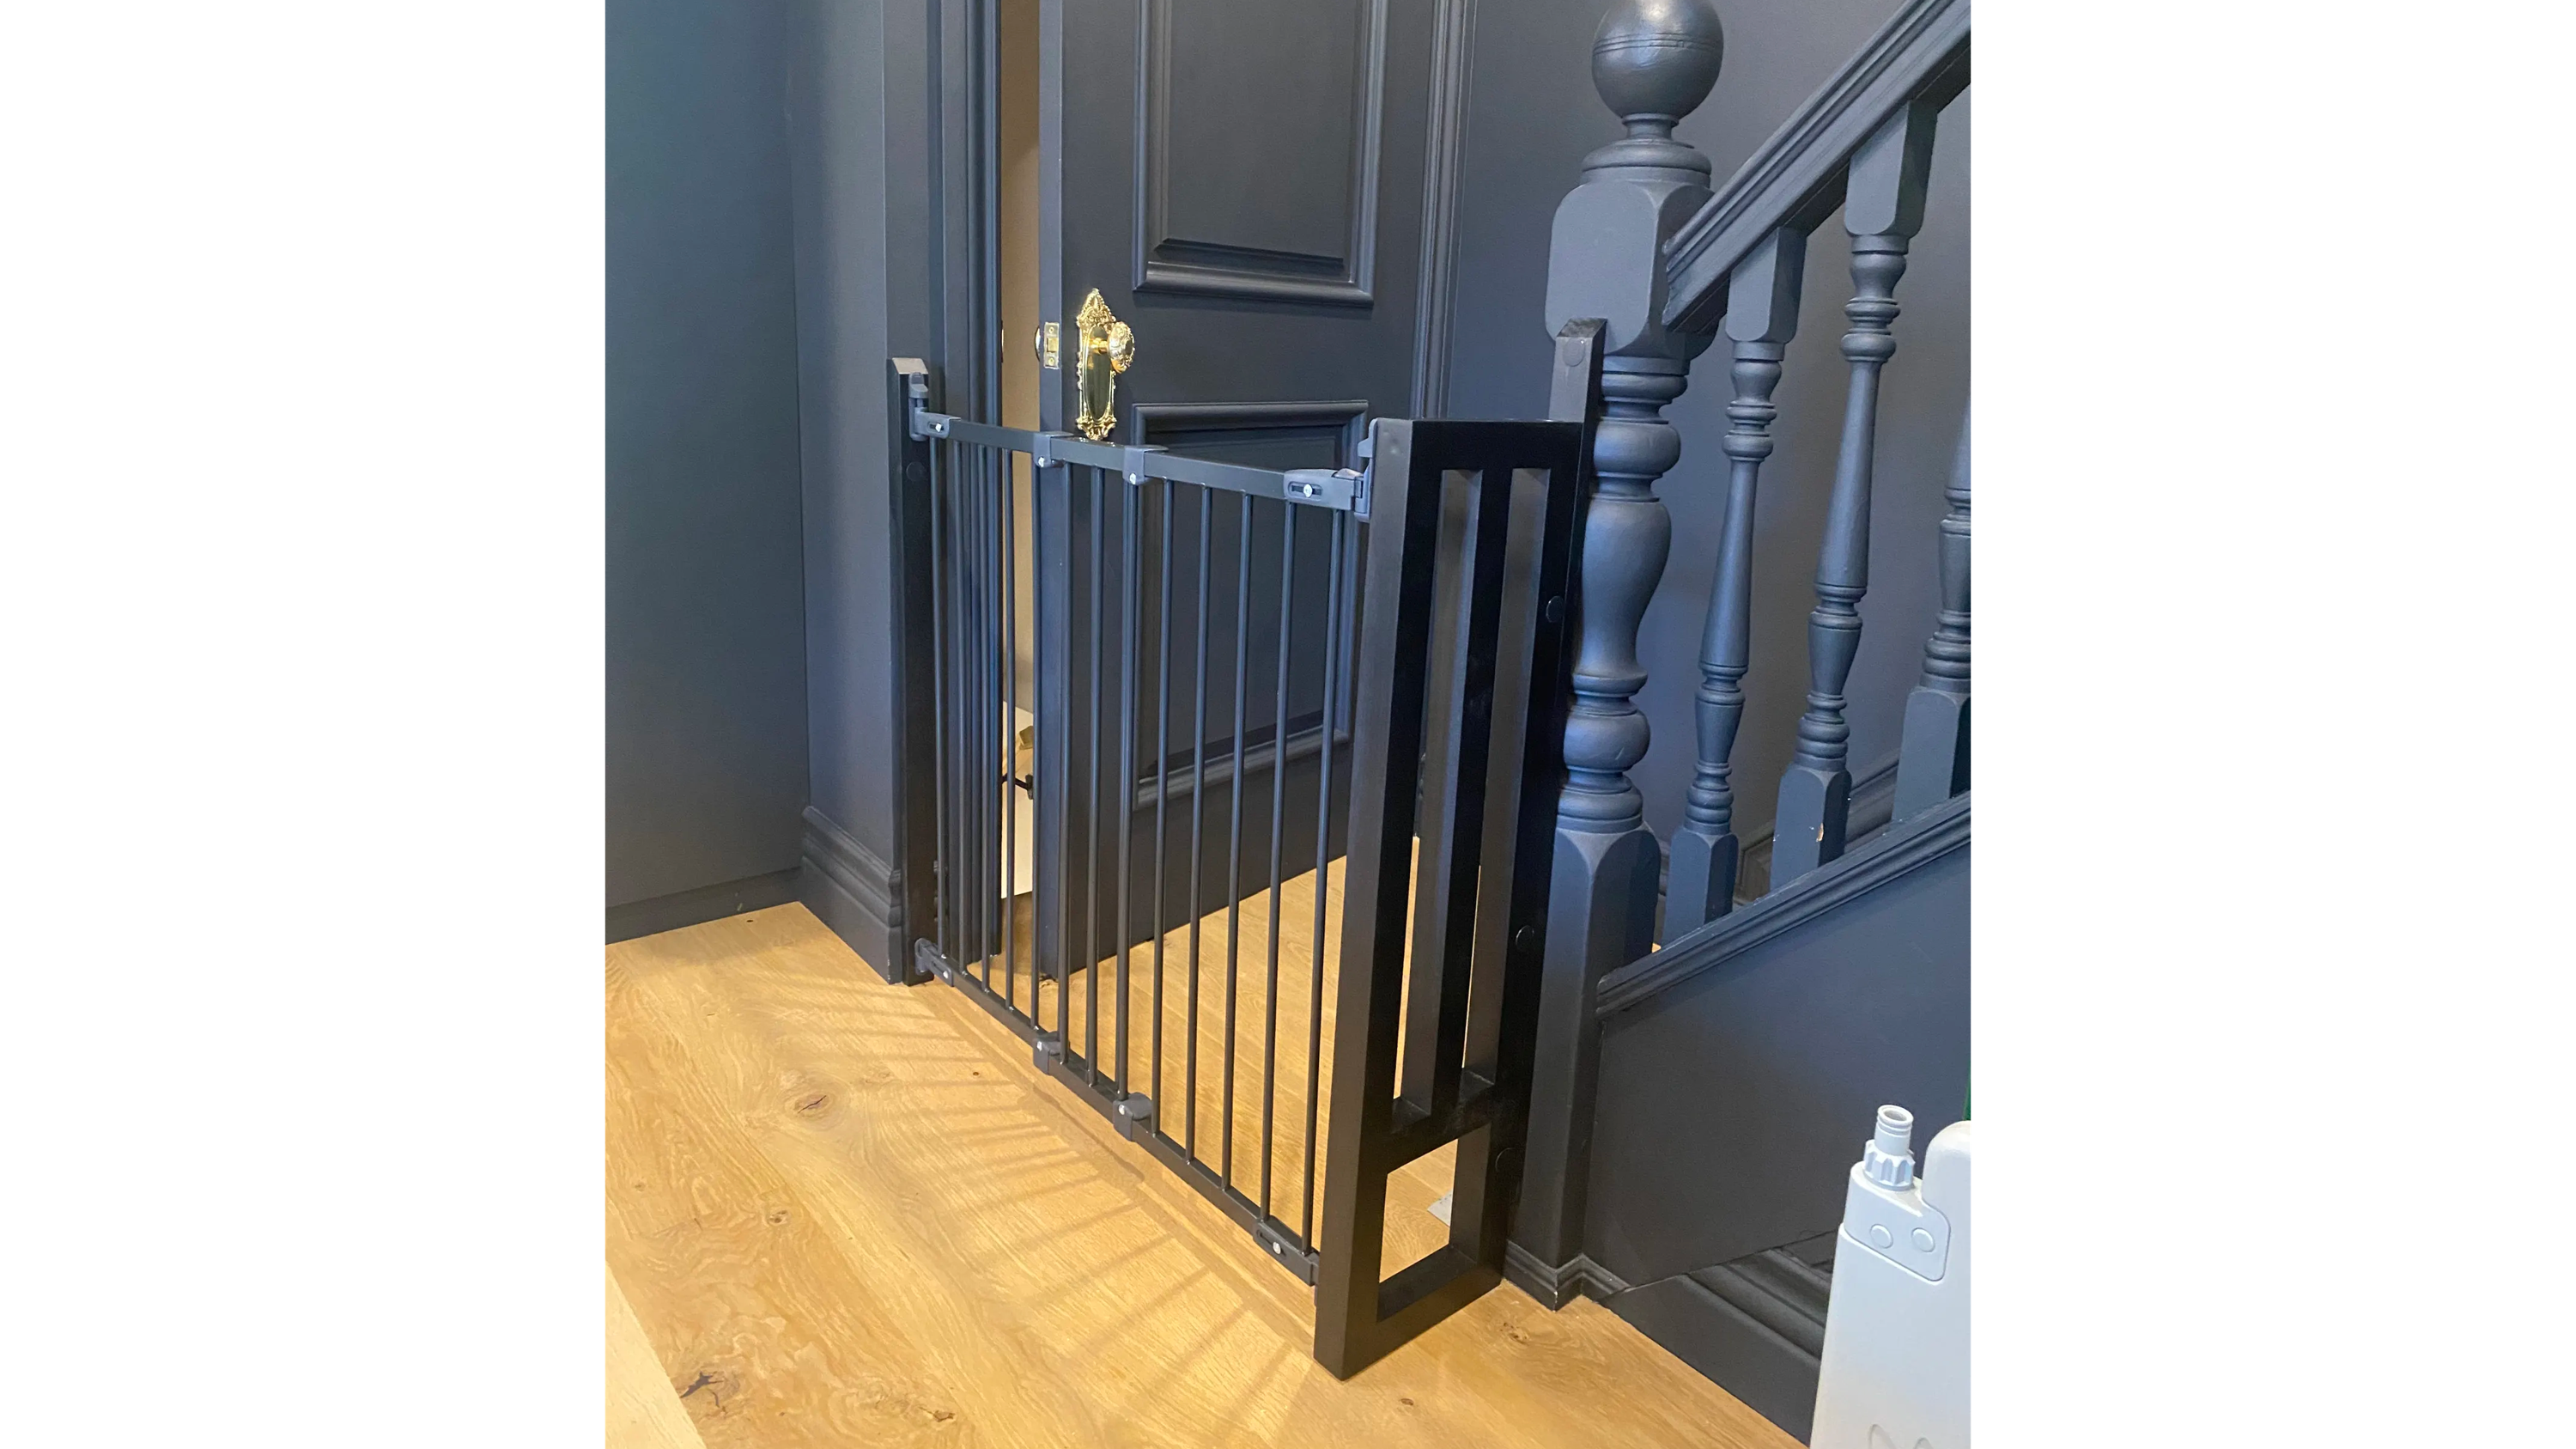 A gate with custom buildout, installed in a customer's home.